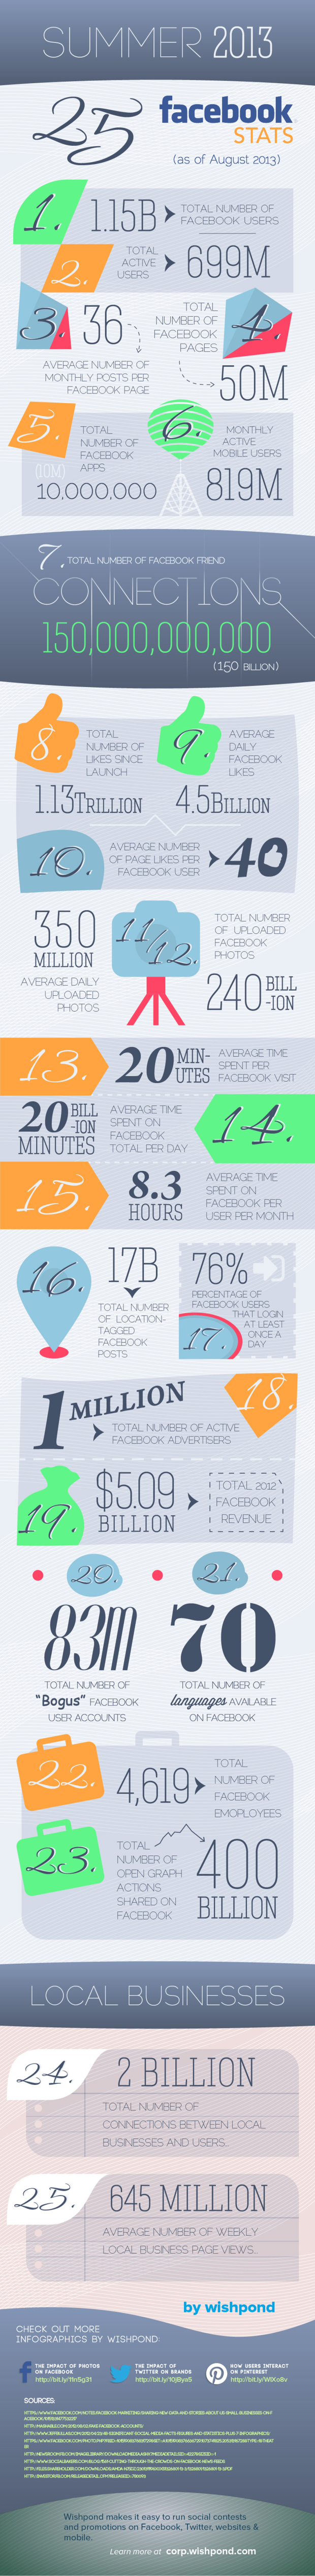 25 Facebook Stats Infographic